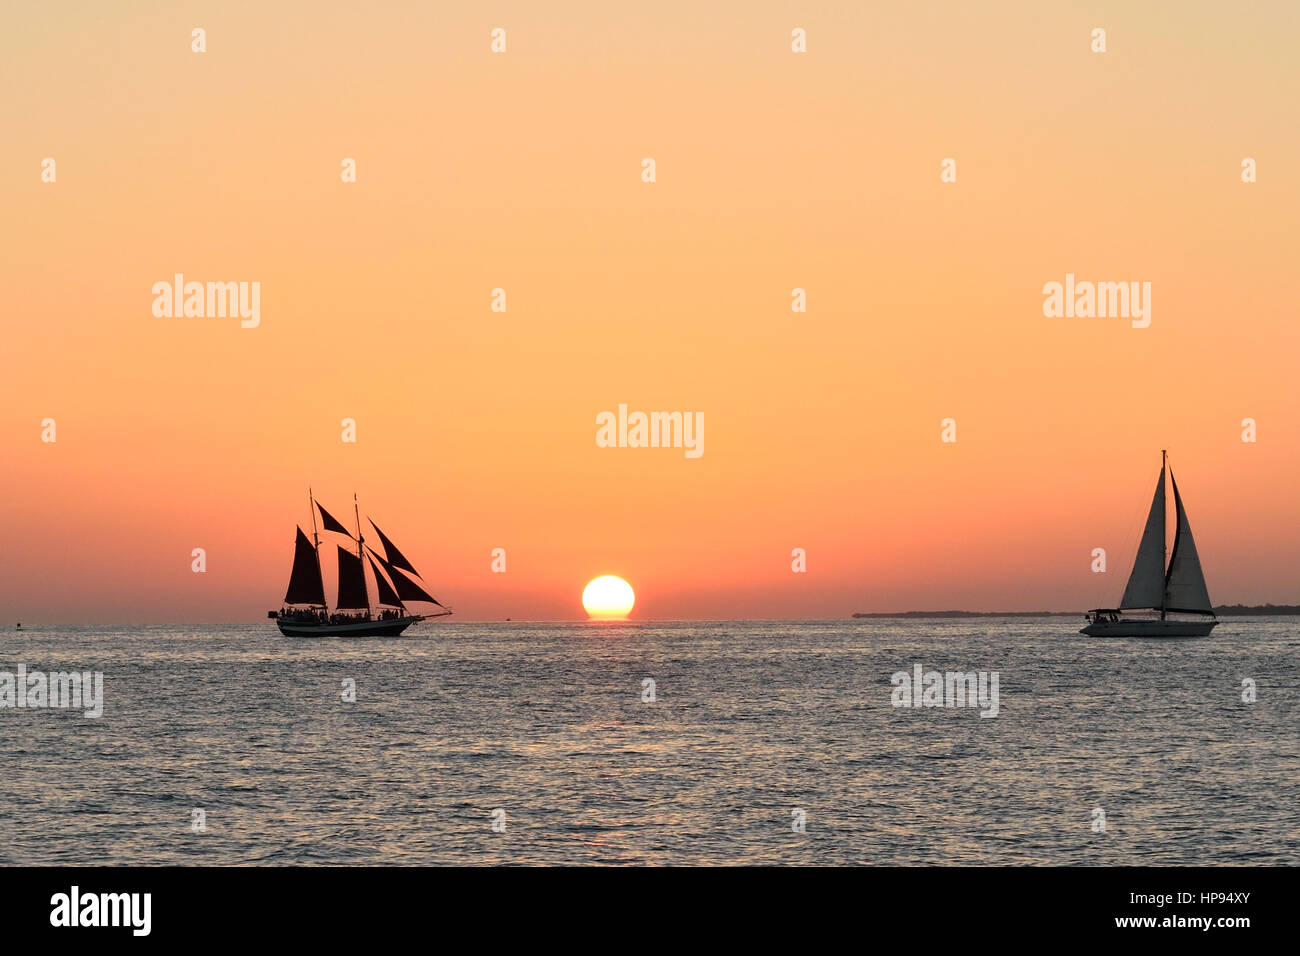 Sailboats in front of a beautiful Key West sunset. Taken from Malory Square Stock Photo